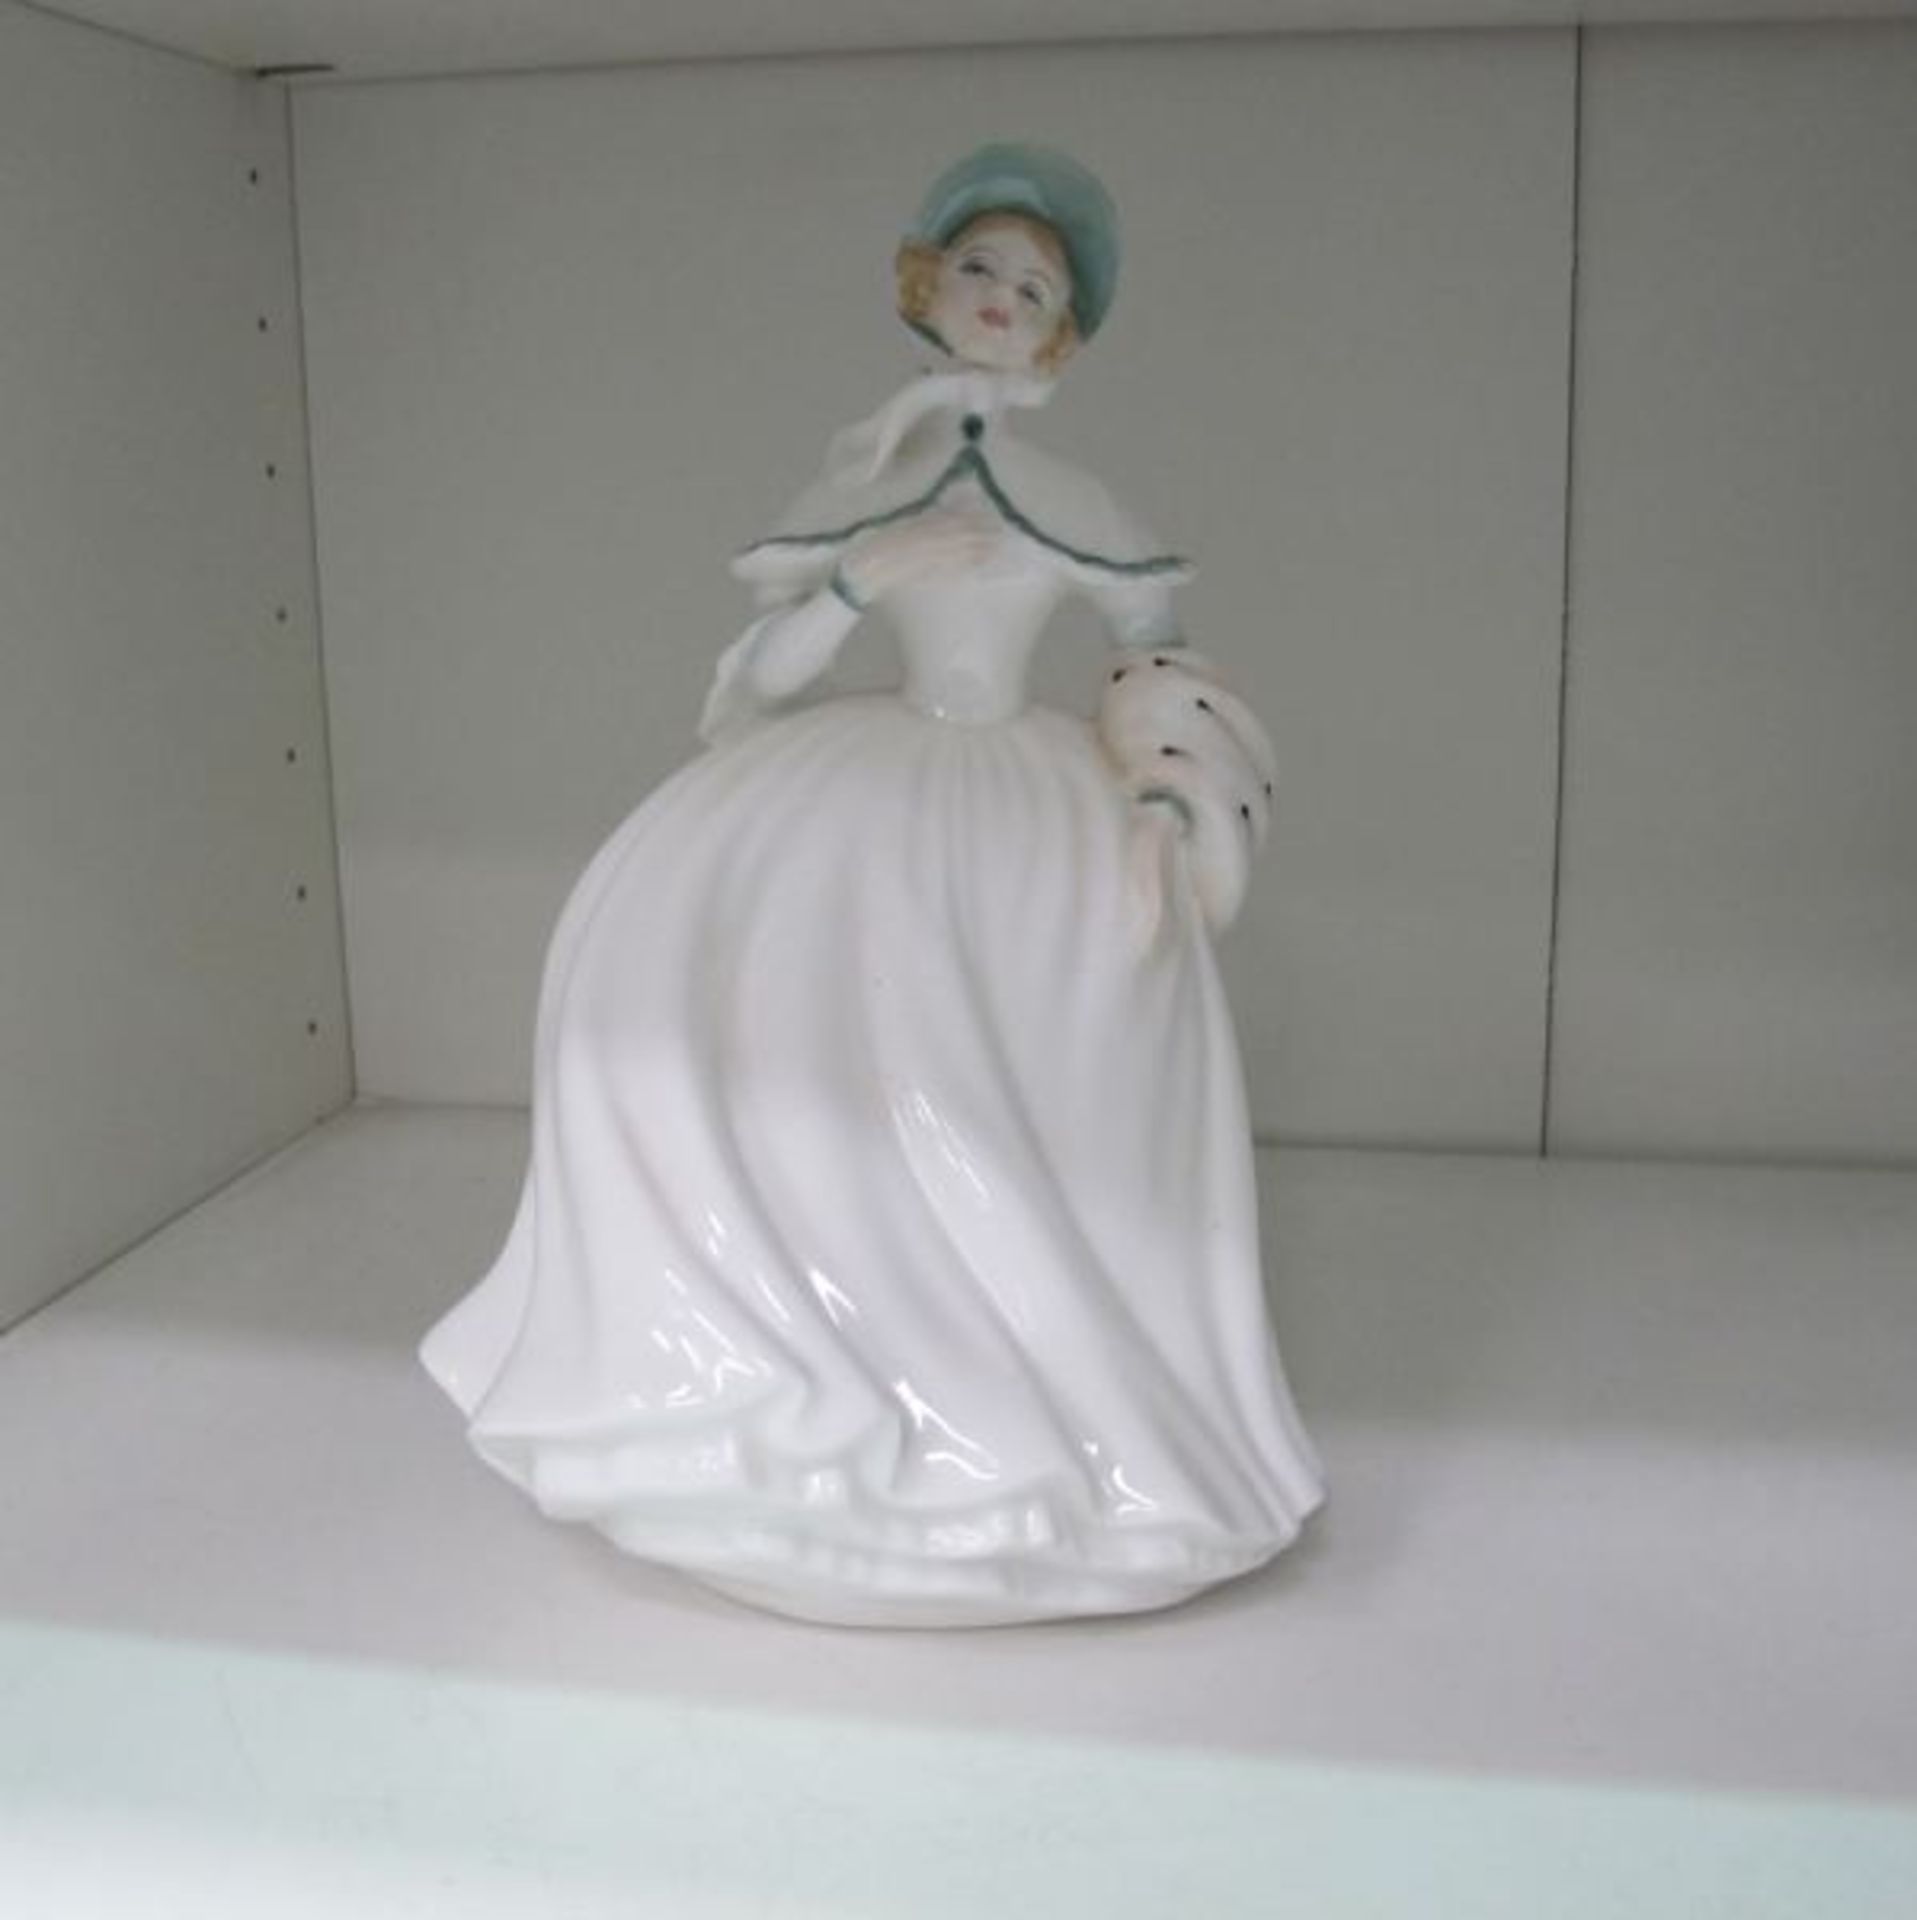 Four figurines of Ladies - Royal Worcester Debutane; Royal Doulton Wintertime and Jessica together - Image 3 of 5